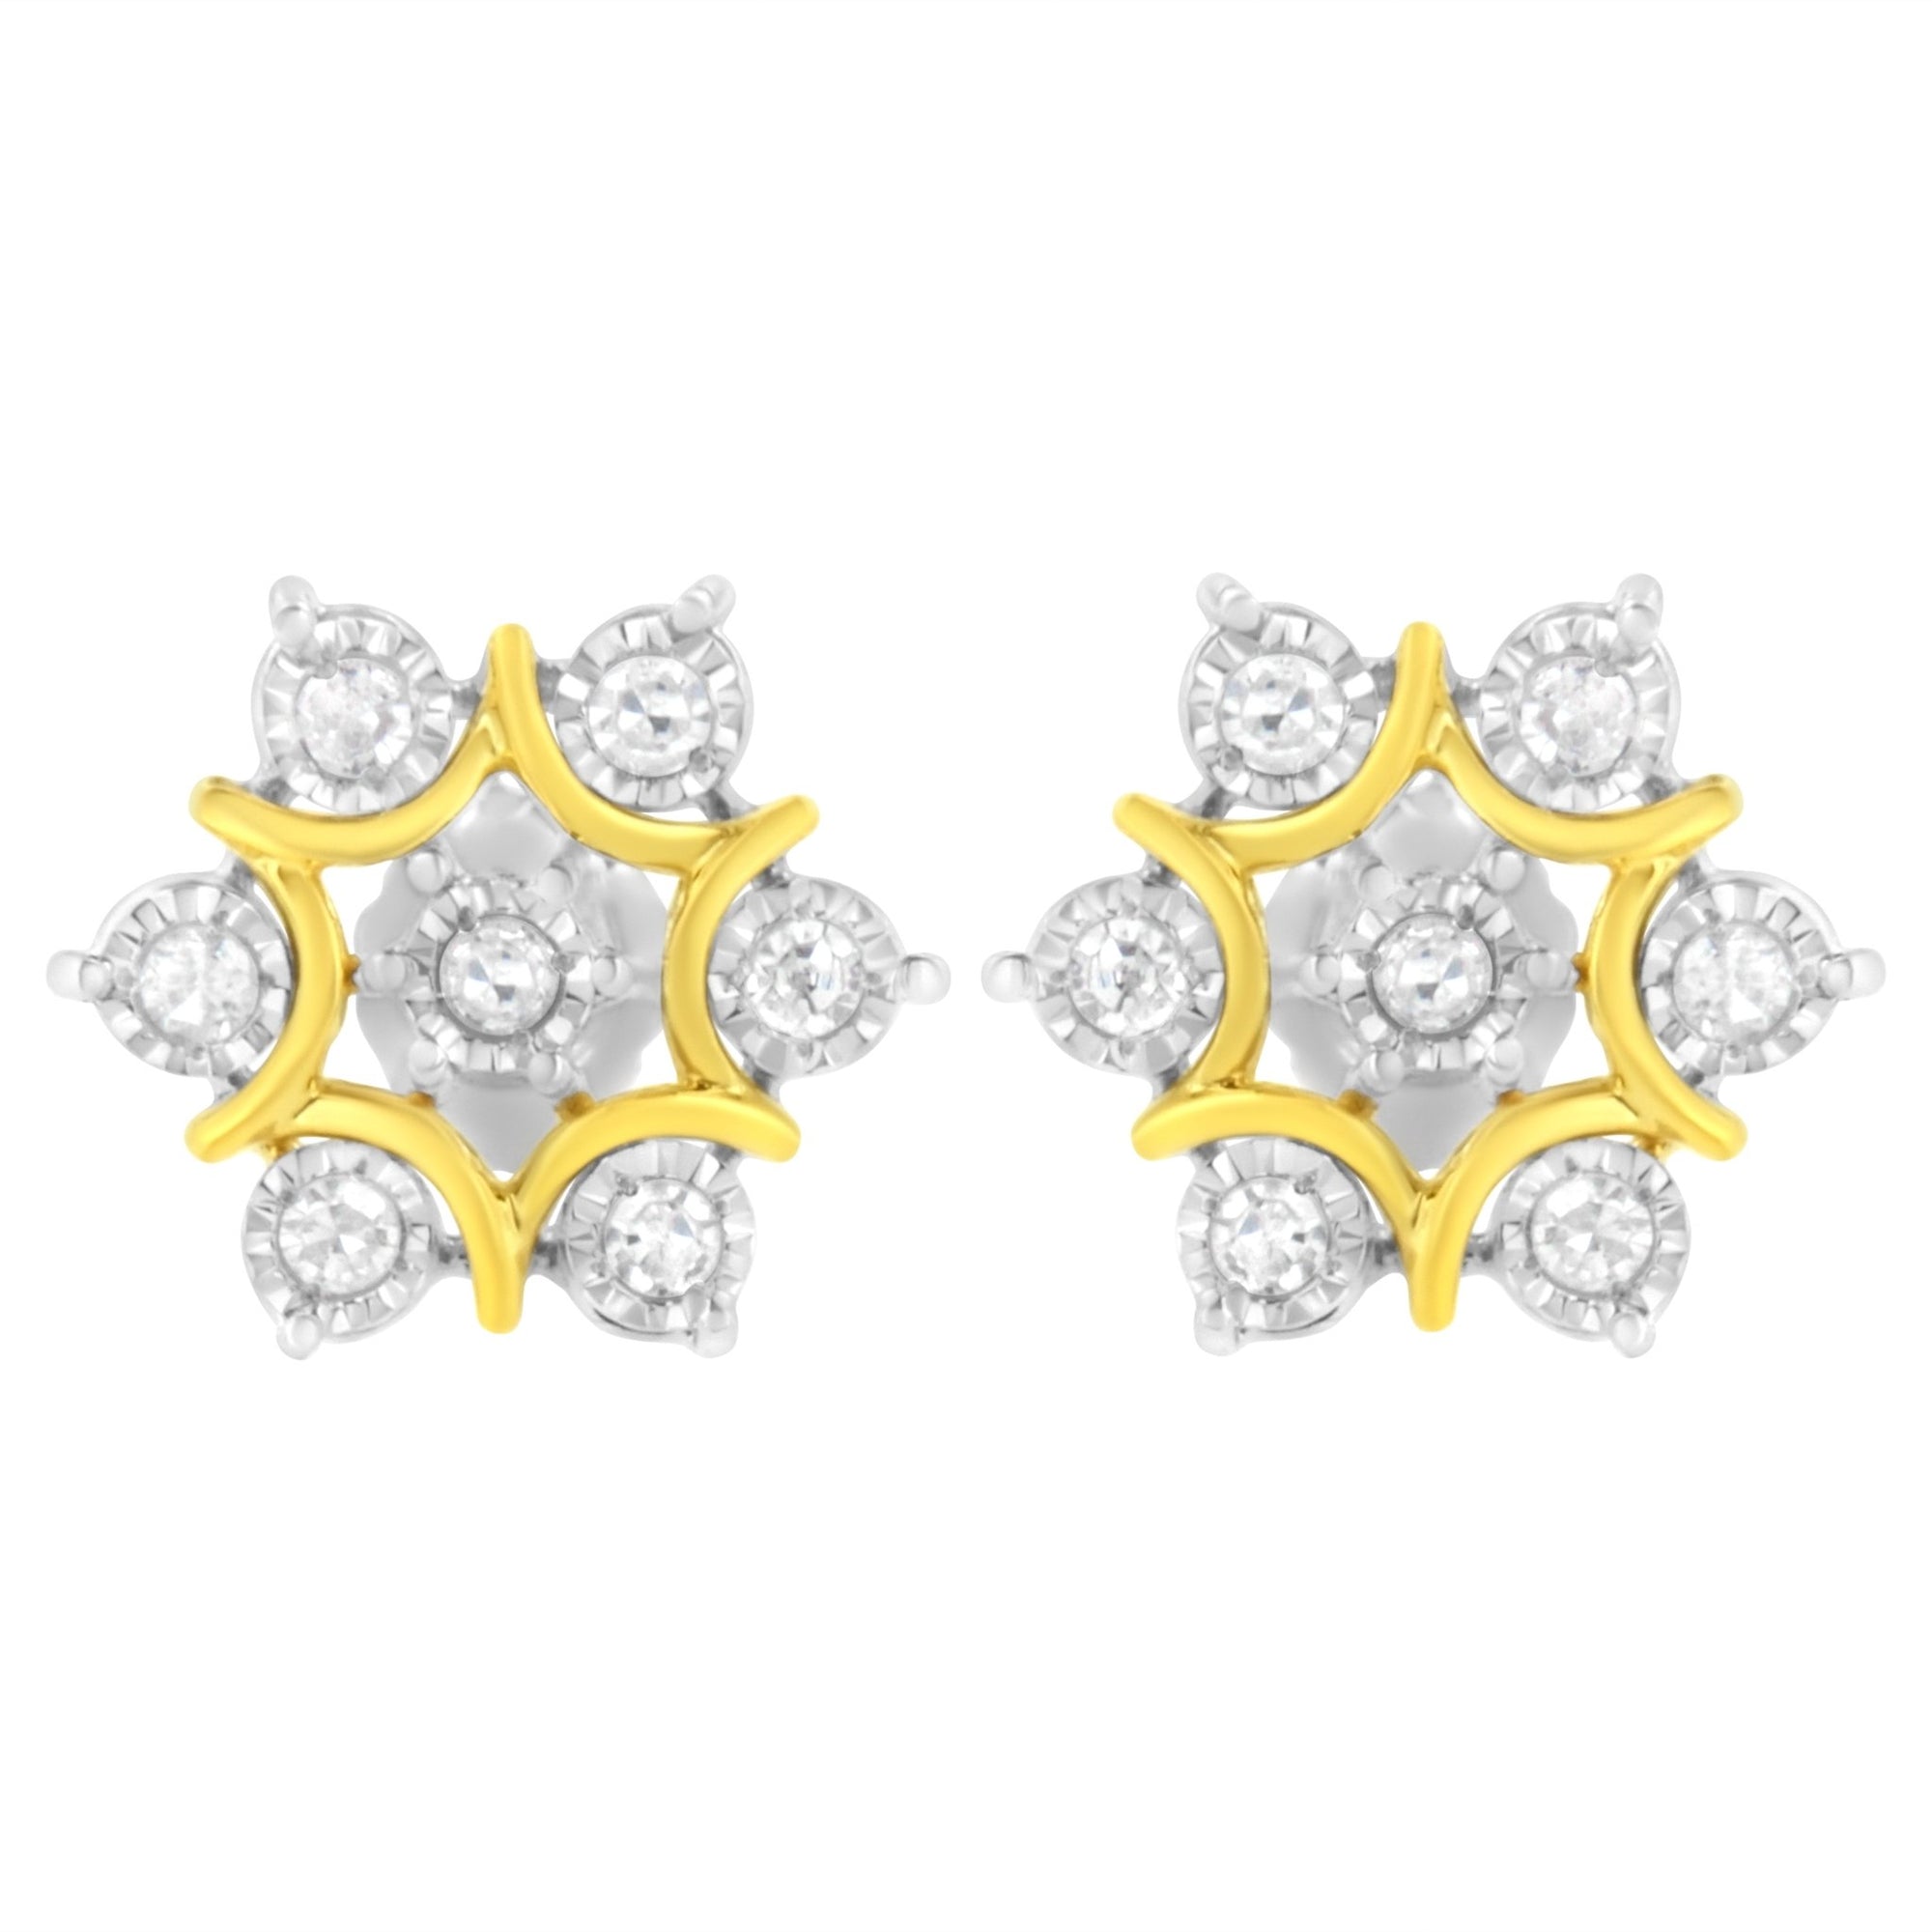 10K Yellow Gold Plated .925 Sterling Silver 1/4 Cttw Miracle Set Round-Cut Diamond Floral Earring (I-J Color, I2-I3 Clarity) - LinkagejewelrydesignLinkagejewelrydesign